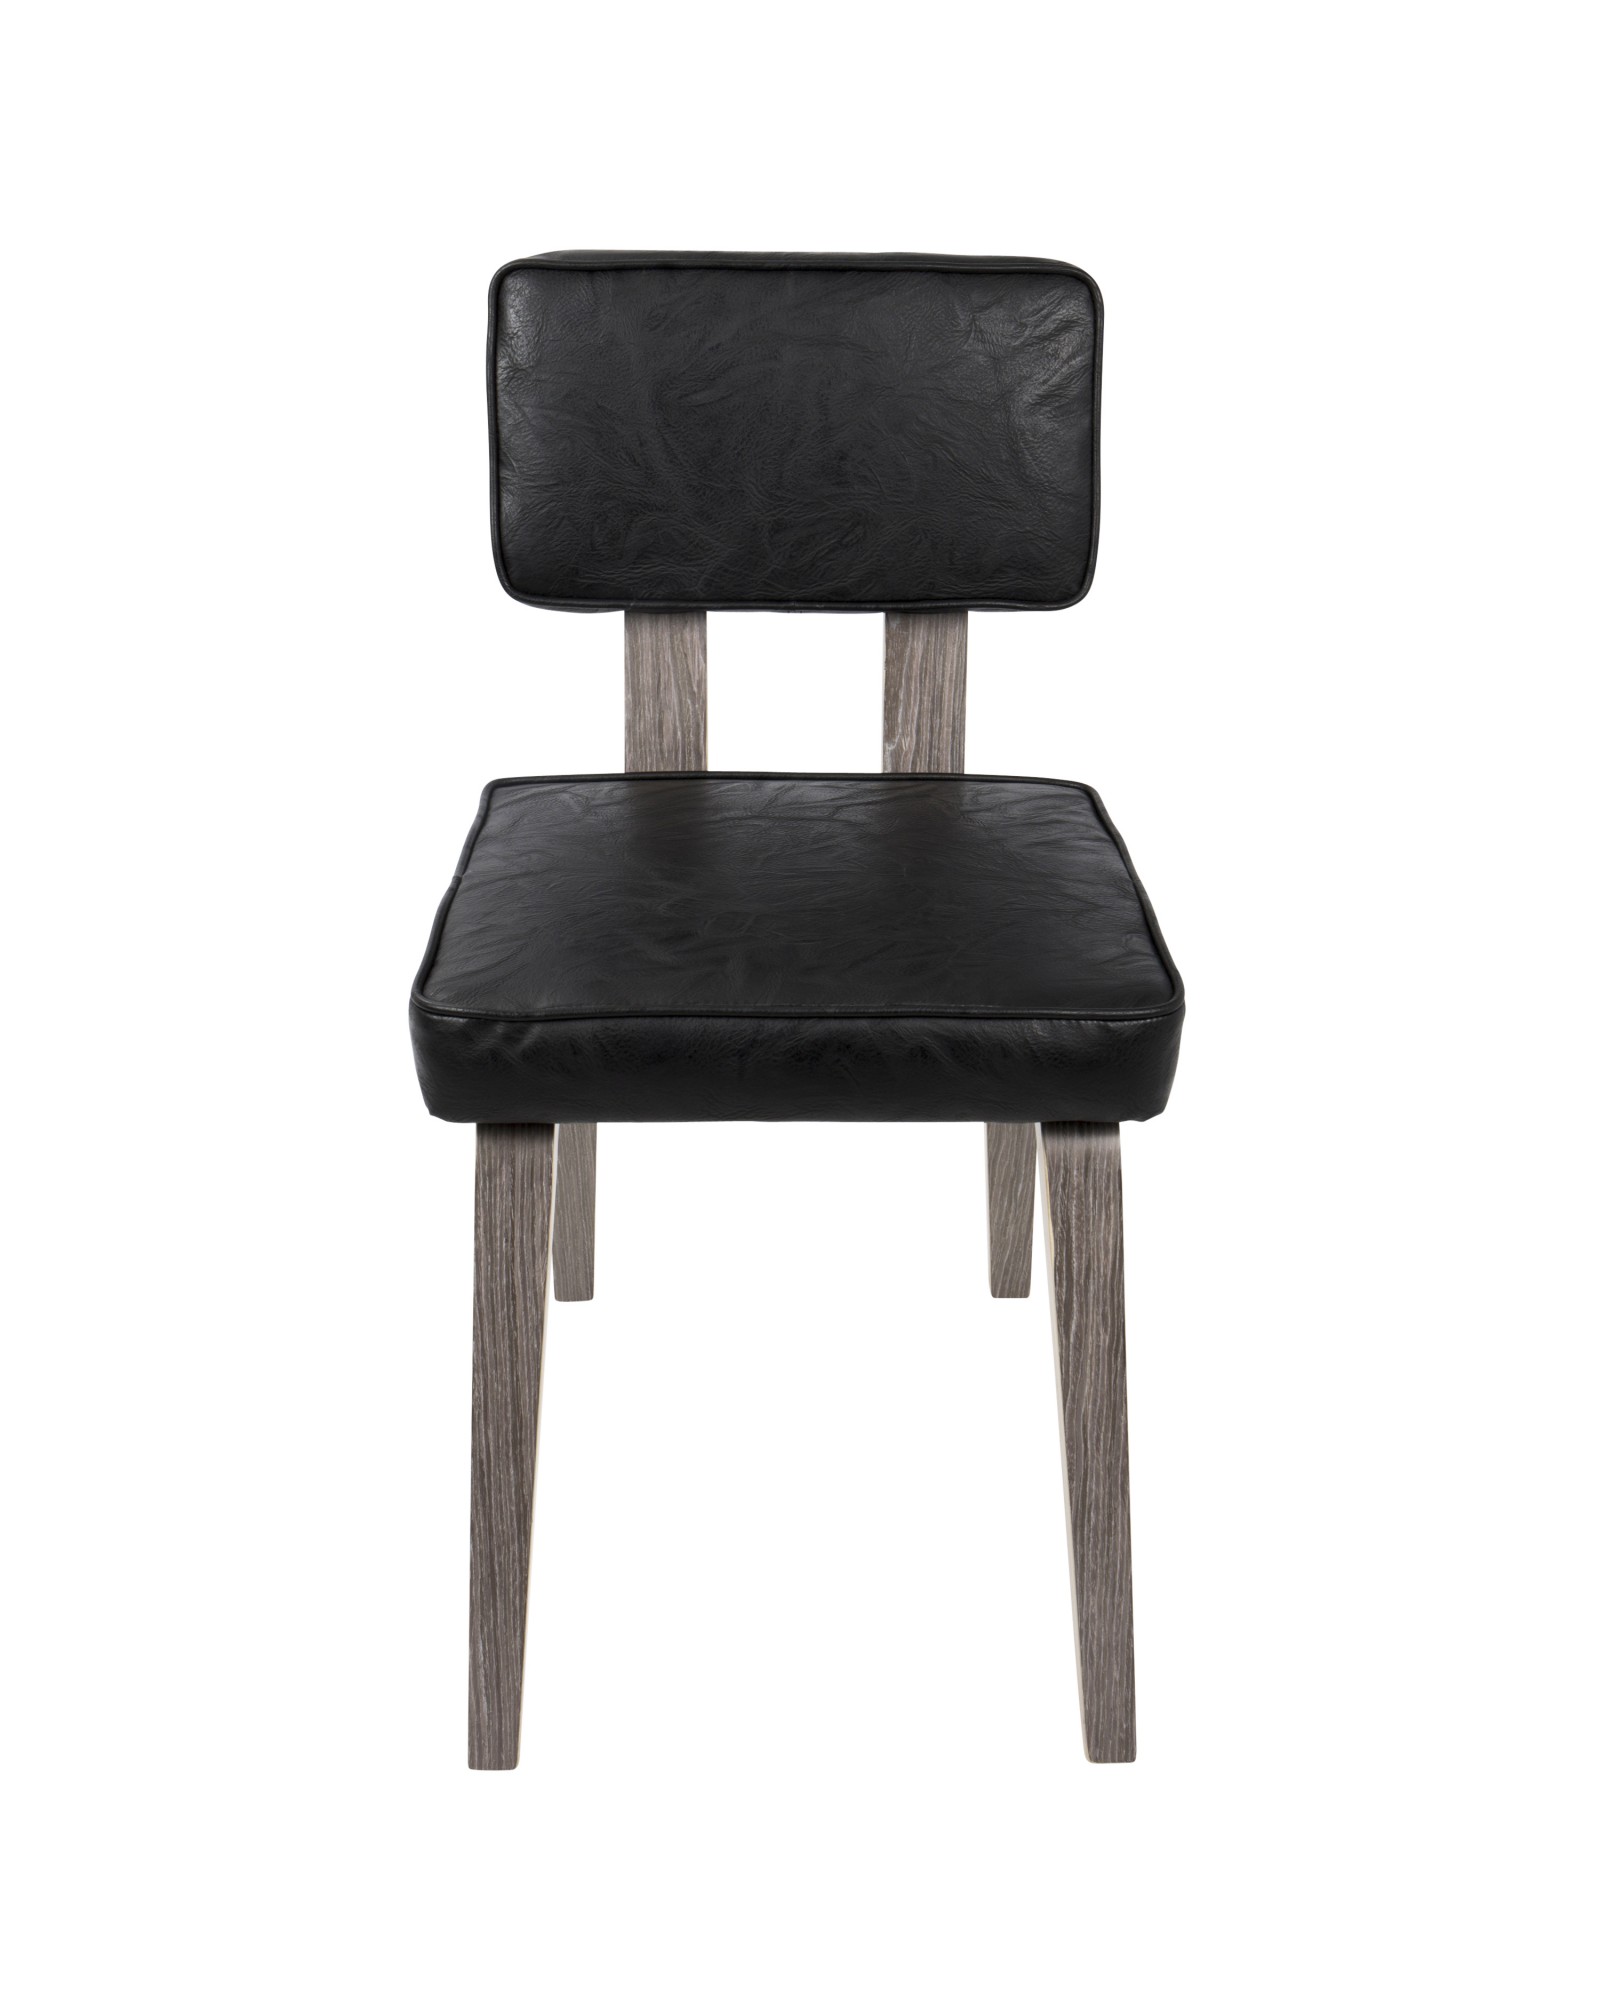 Nunzio Mid-Century Modern Dining Chair in Light Grey Wood and Black Faux Leather - Set of 2